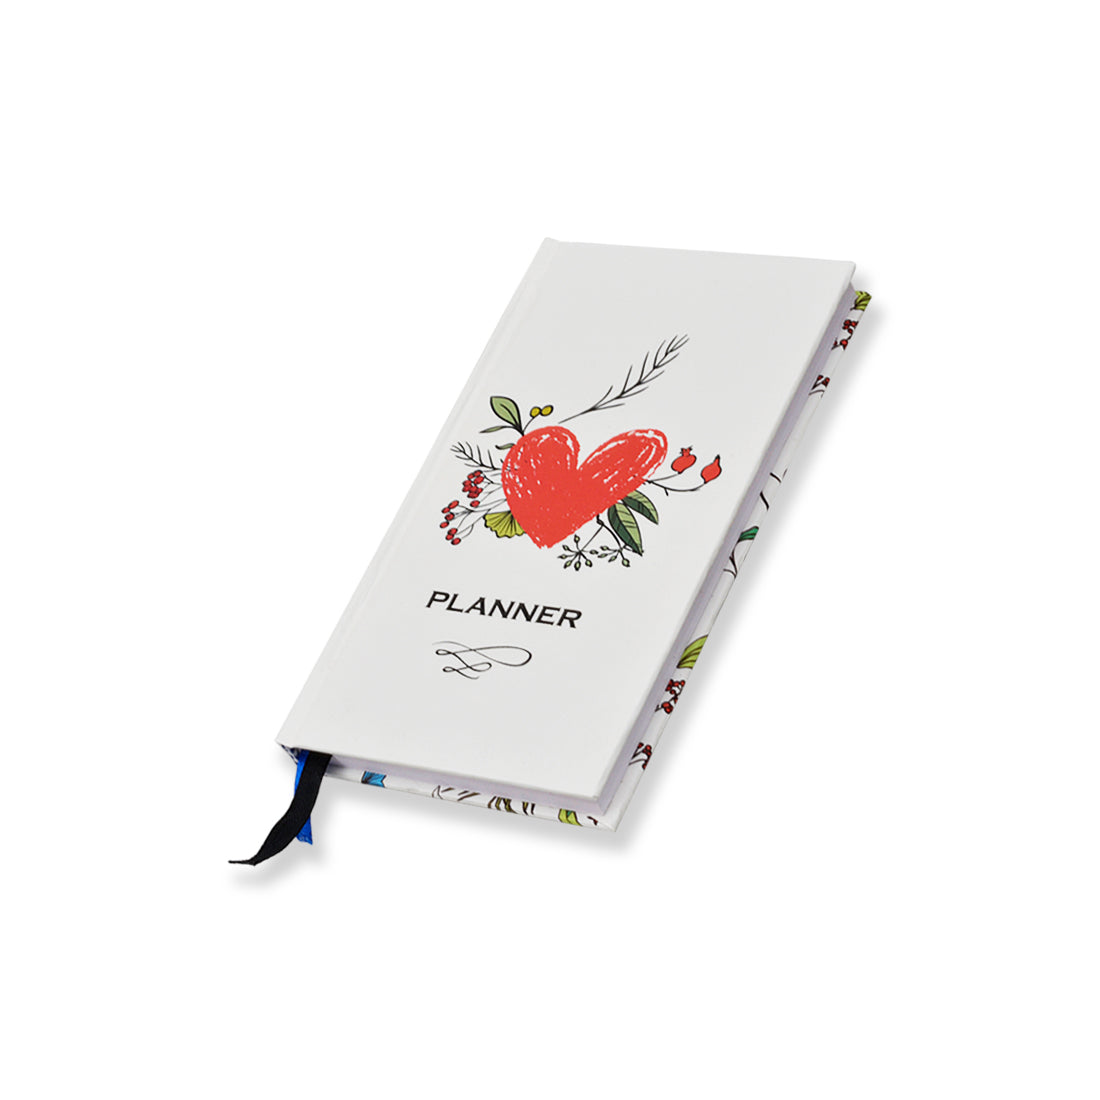 Undated Pocket Planner Diary, Daily Calendar to Boost Productivity & Hit Your Goals (Set of 2)